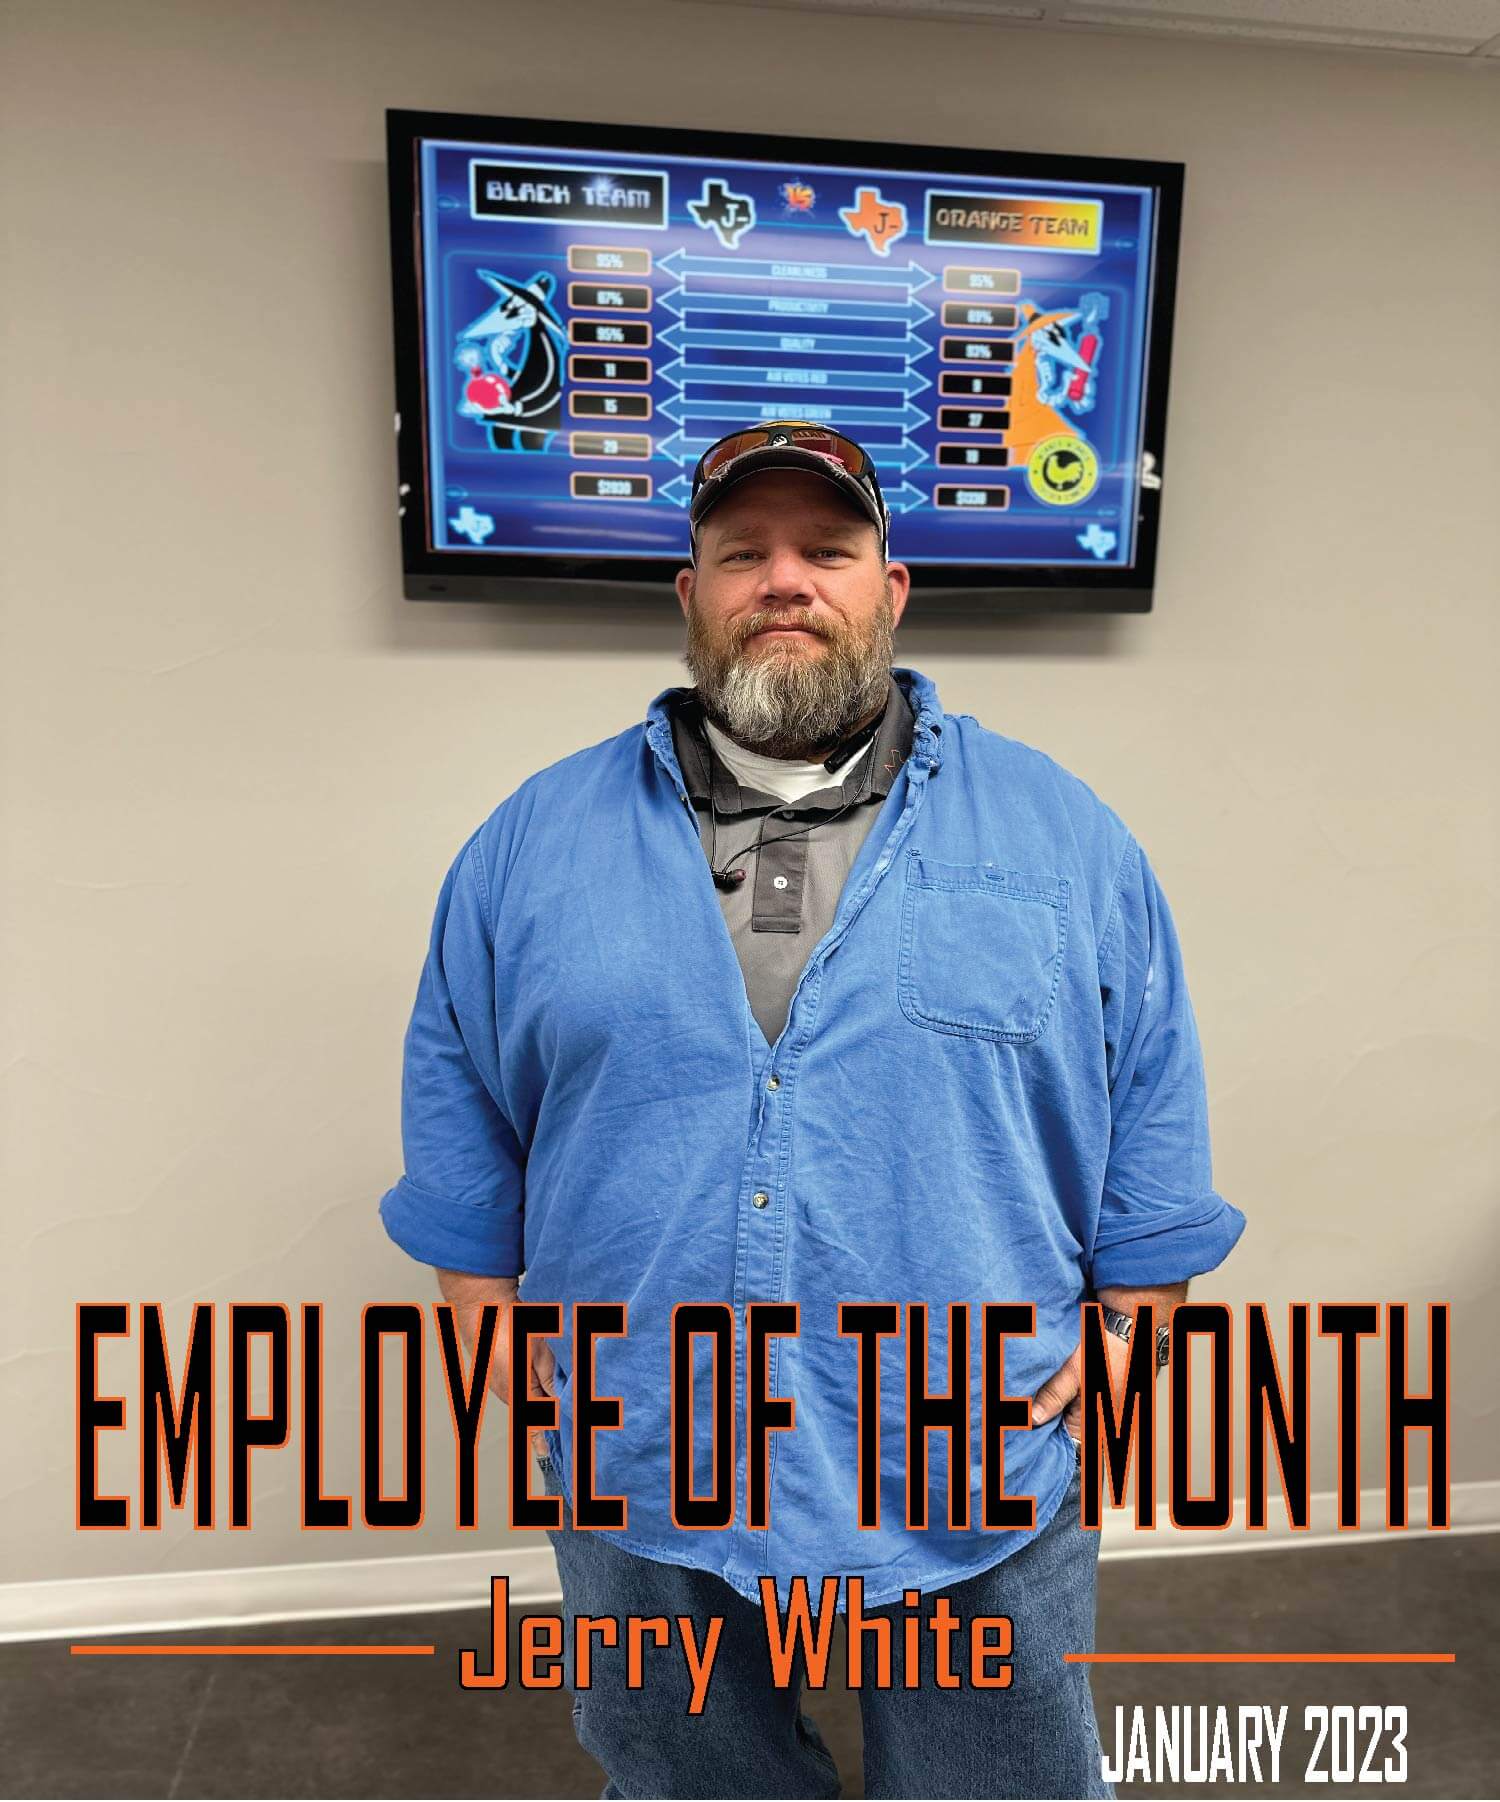 Jerry White - Employee of the Month